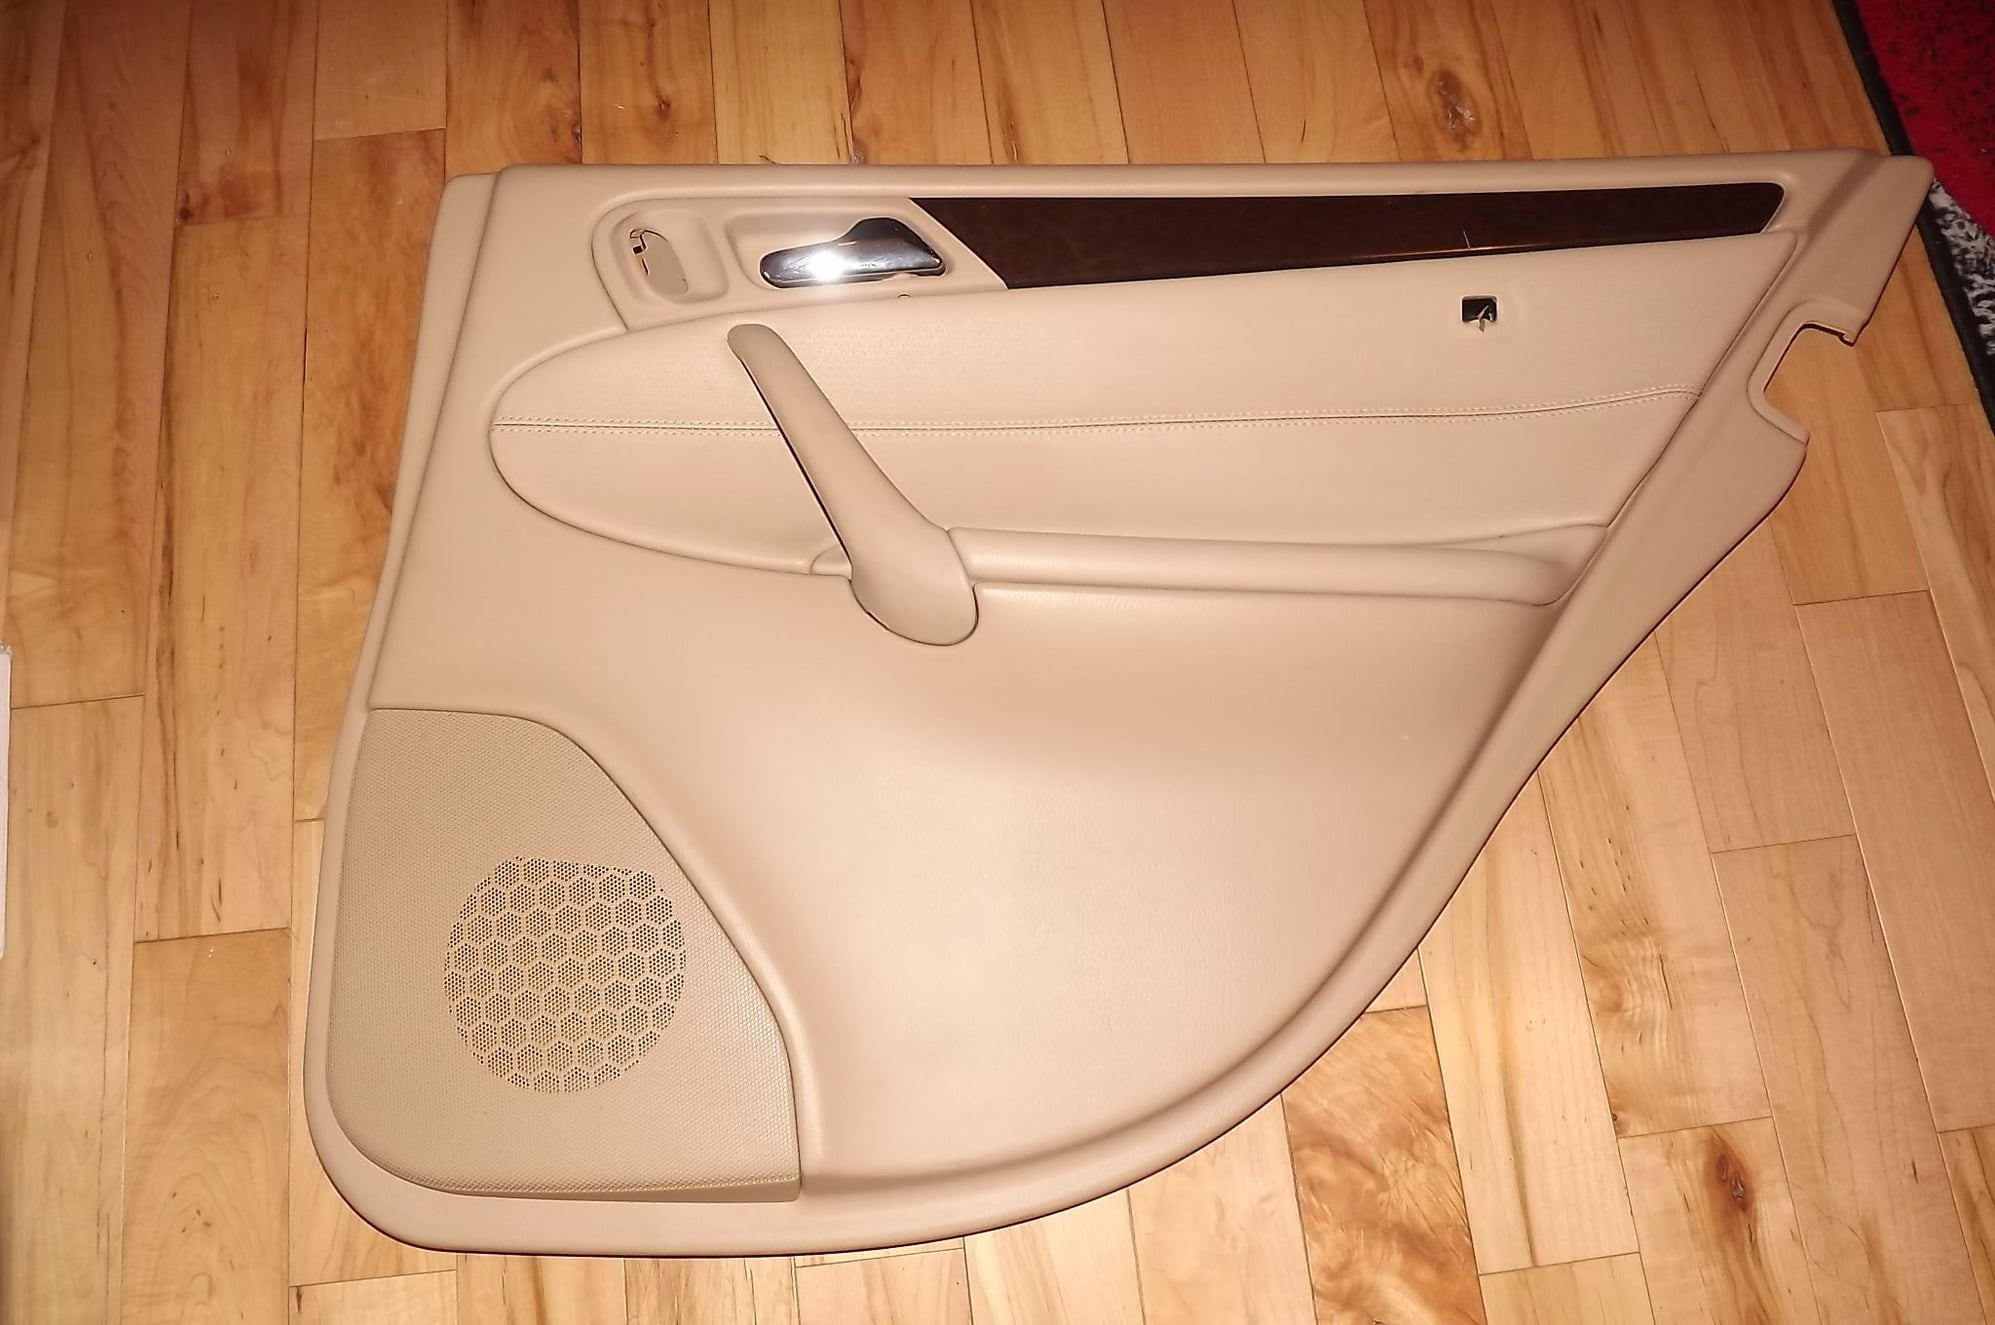 Interior/Upholstery - 01-05 Mercedes W203 C240 C320 Rear Right Interior Door Panel Beige - Used - All Years Mercedes-Benz C320 - Wallington, NJ 07057, United States